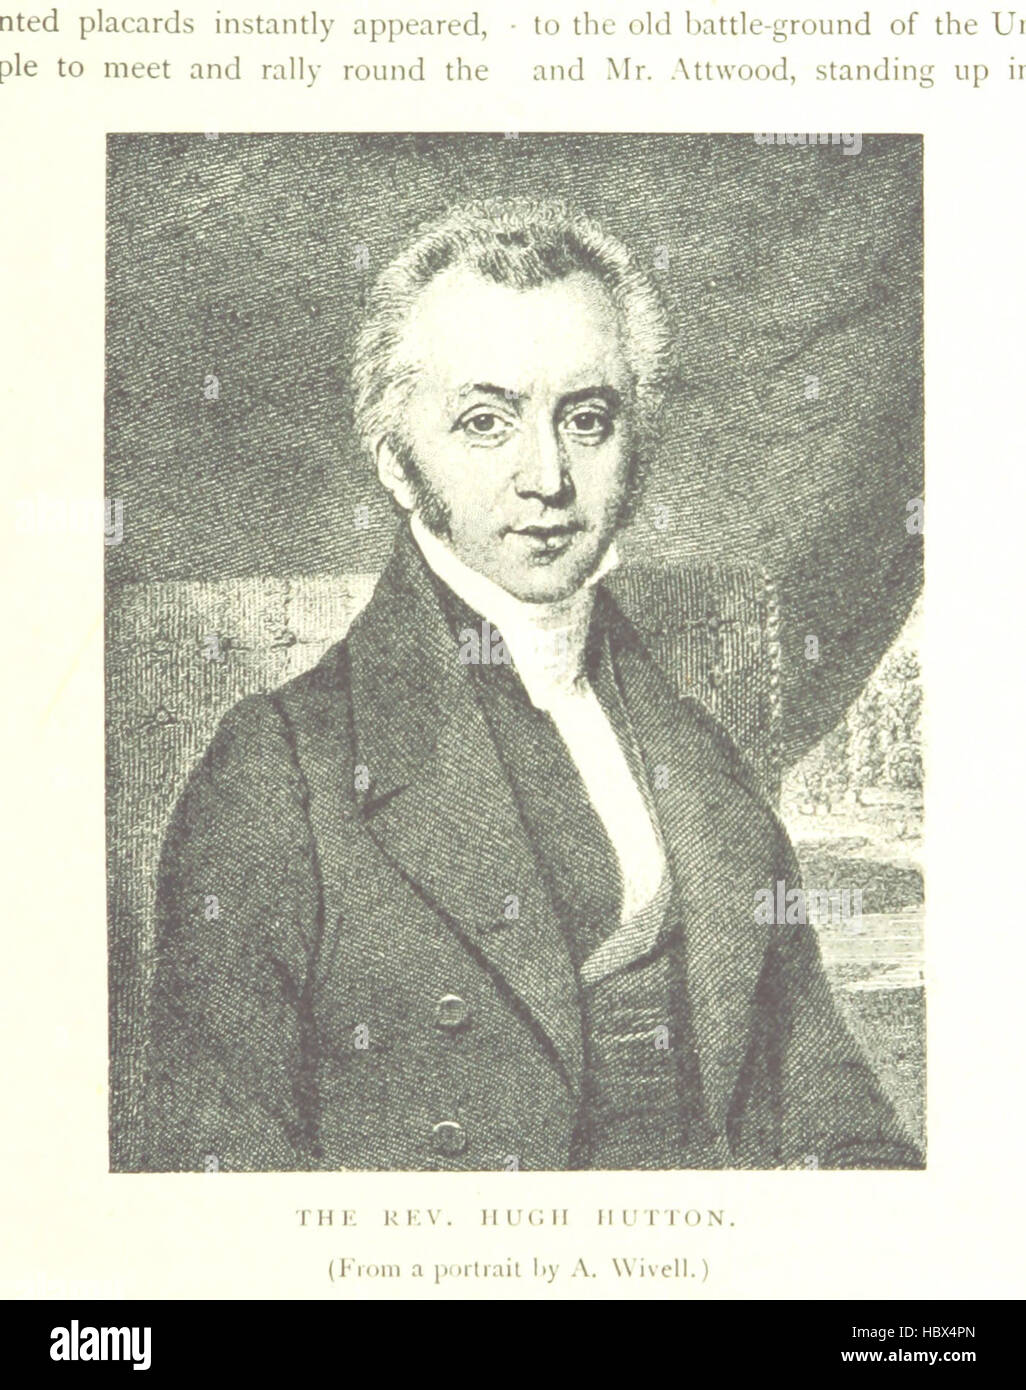 Image taken from page 391 of 'The Making of Birmingham: being a history of the rise and growth of the Midland metropolis ... With ... illustrations, etc' Image taken from page 391 of 'The Making of Birmingham Stock Photo